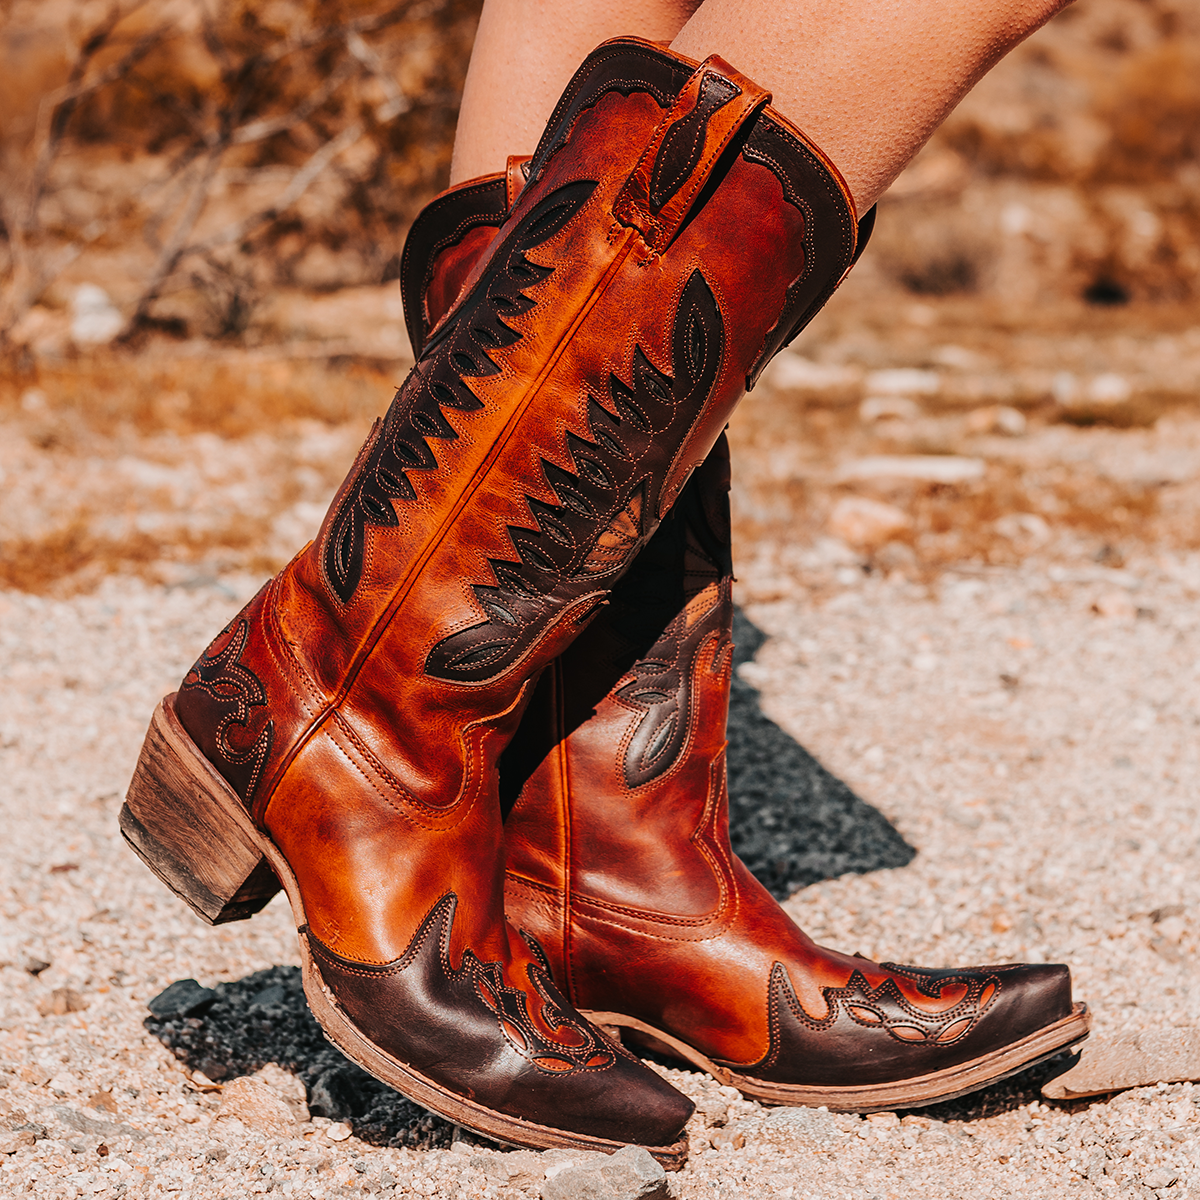 FREEBIRD women's Willie cognac multi leather western boot with textured design, stitch detailing, and snip toe construction